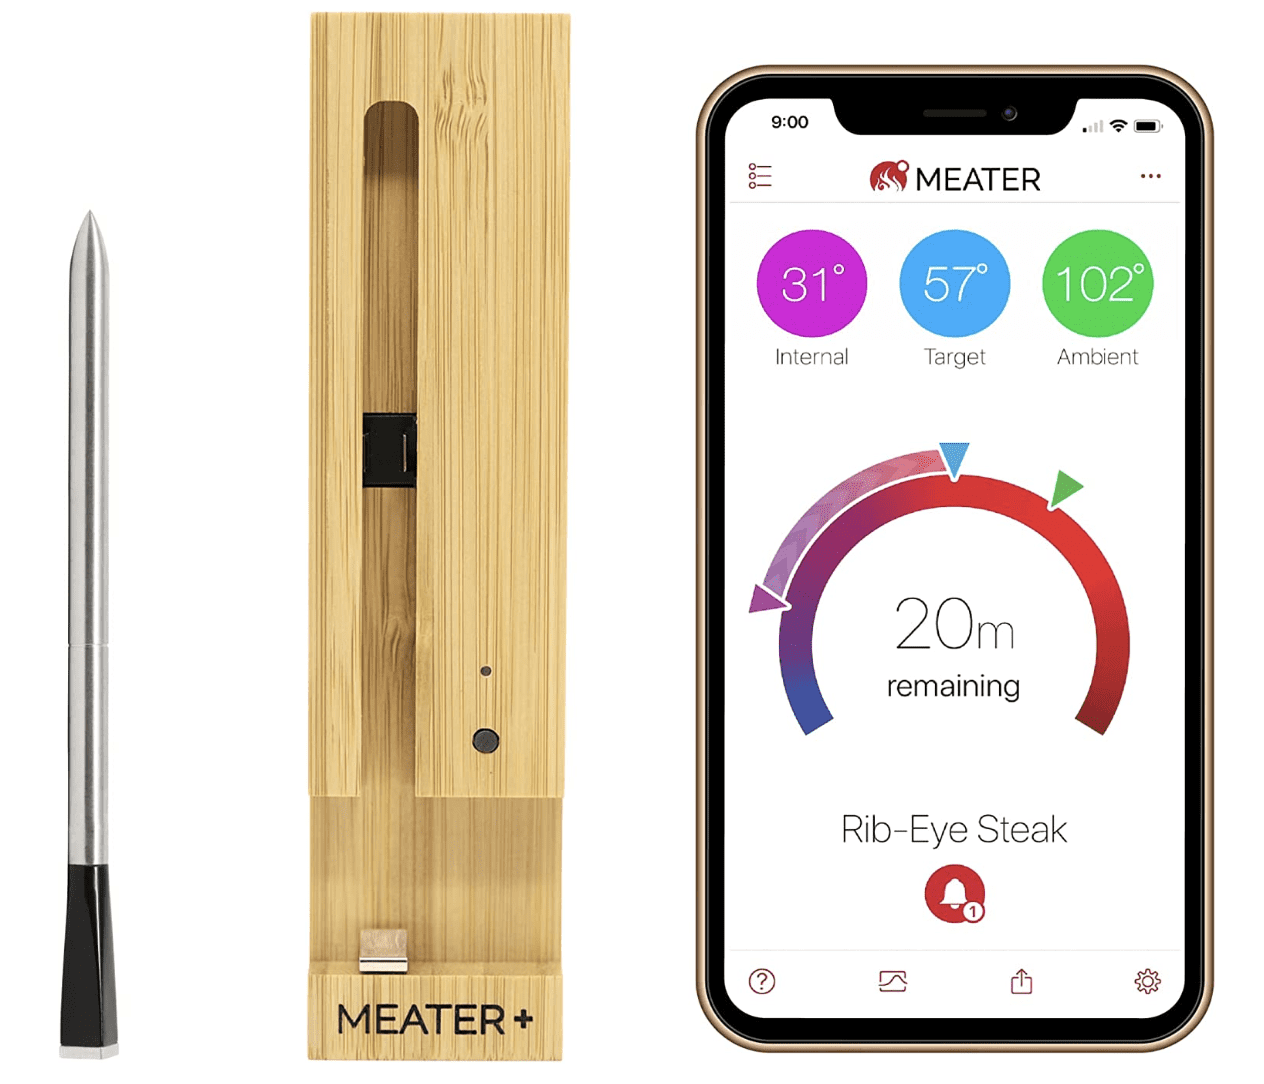 Meater Plus meat thermometer review: Hands-off precision cooking - Reviewed